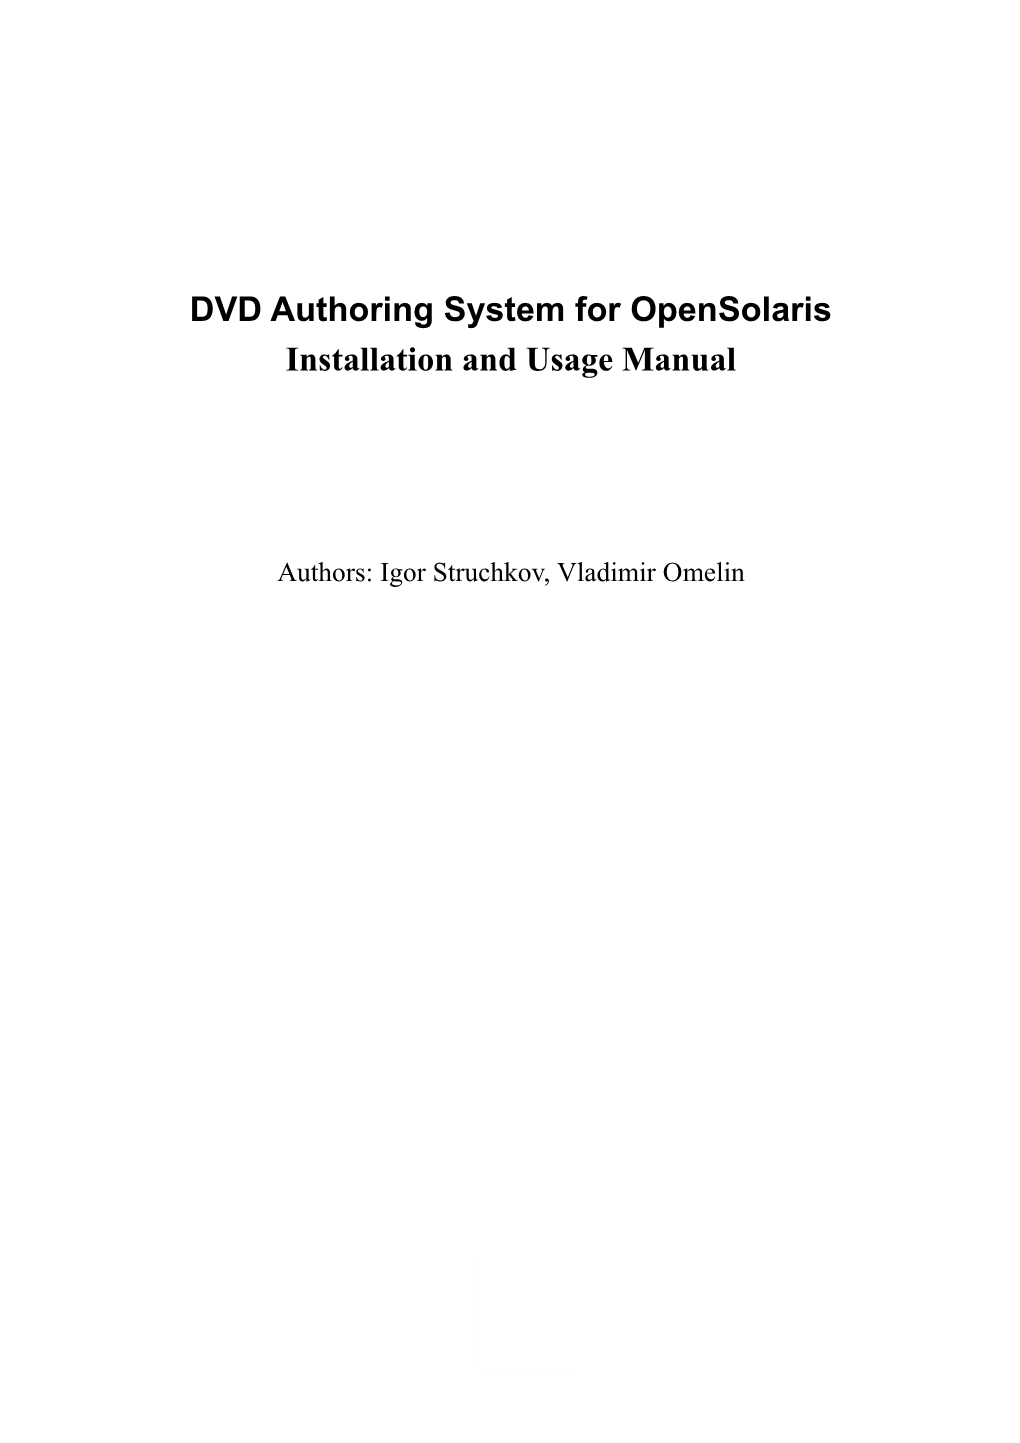 DVD Authoring System for Opensolaris Installation and Usage Manual